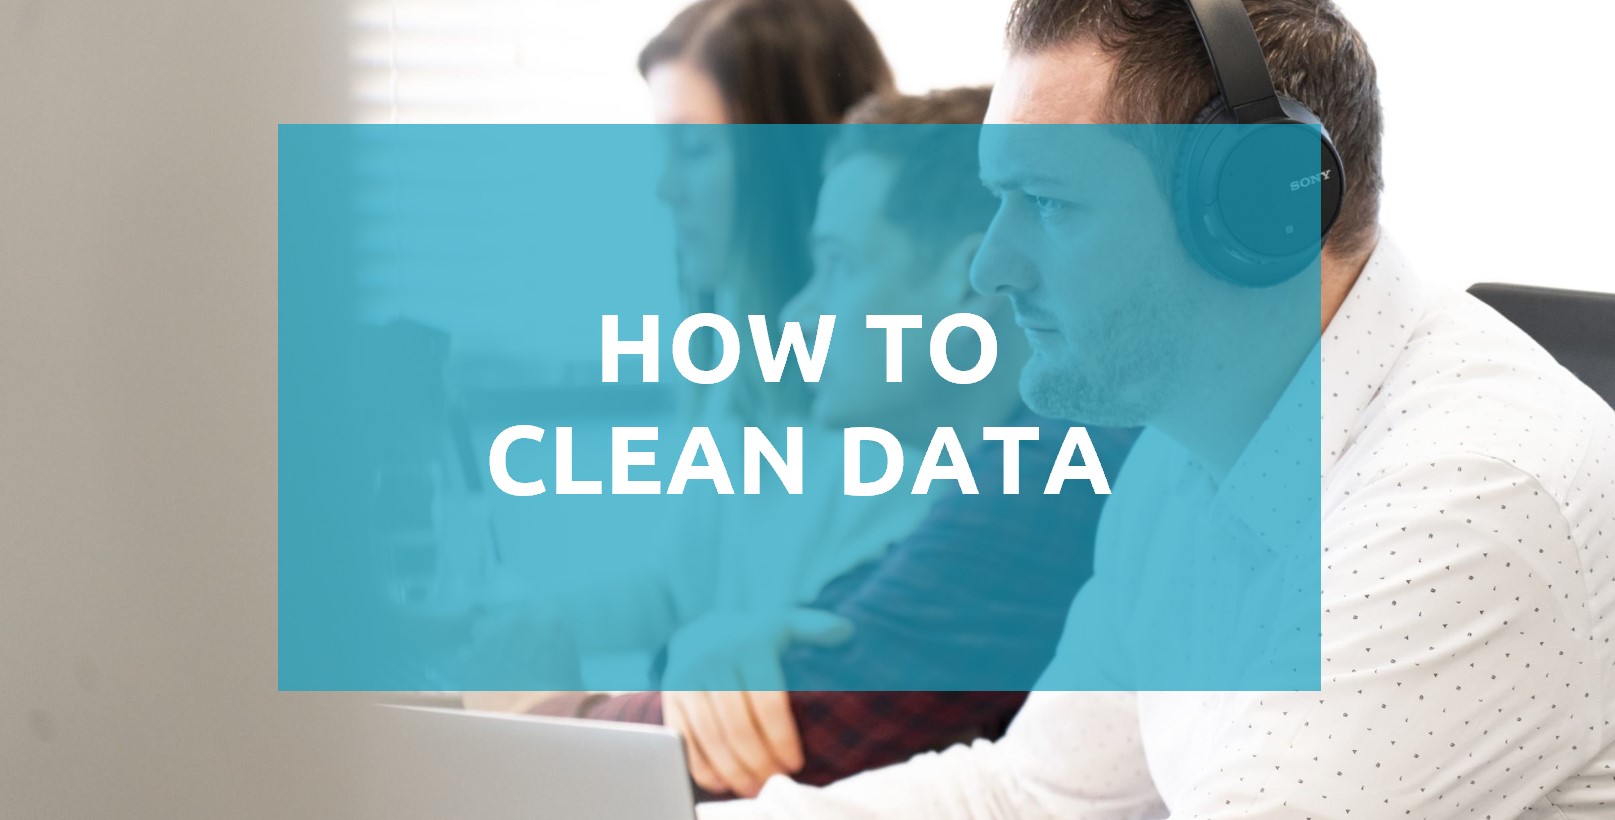 How to data cleaning